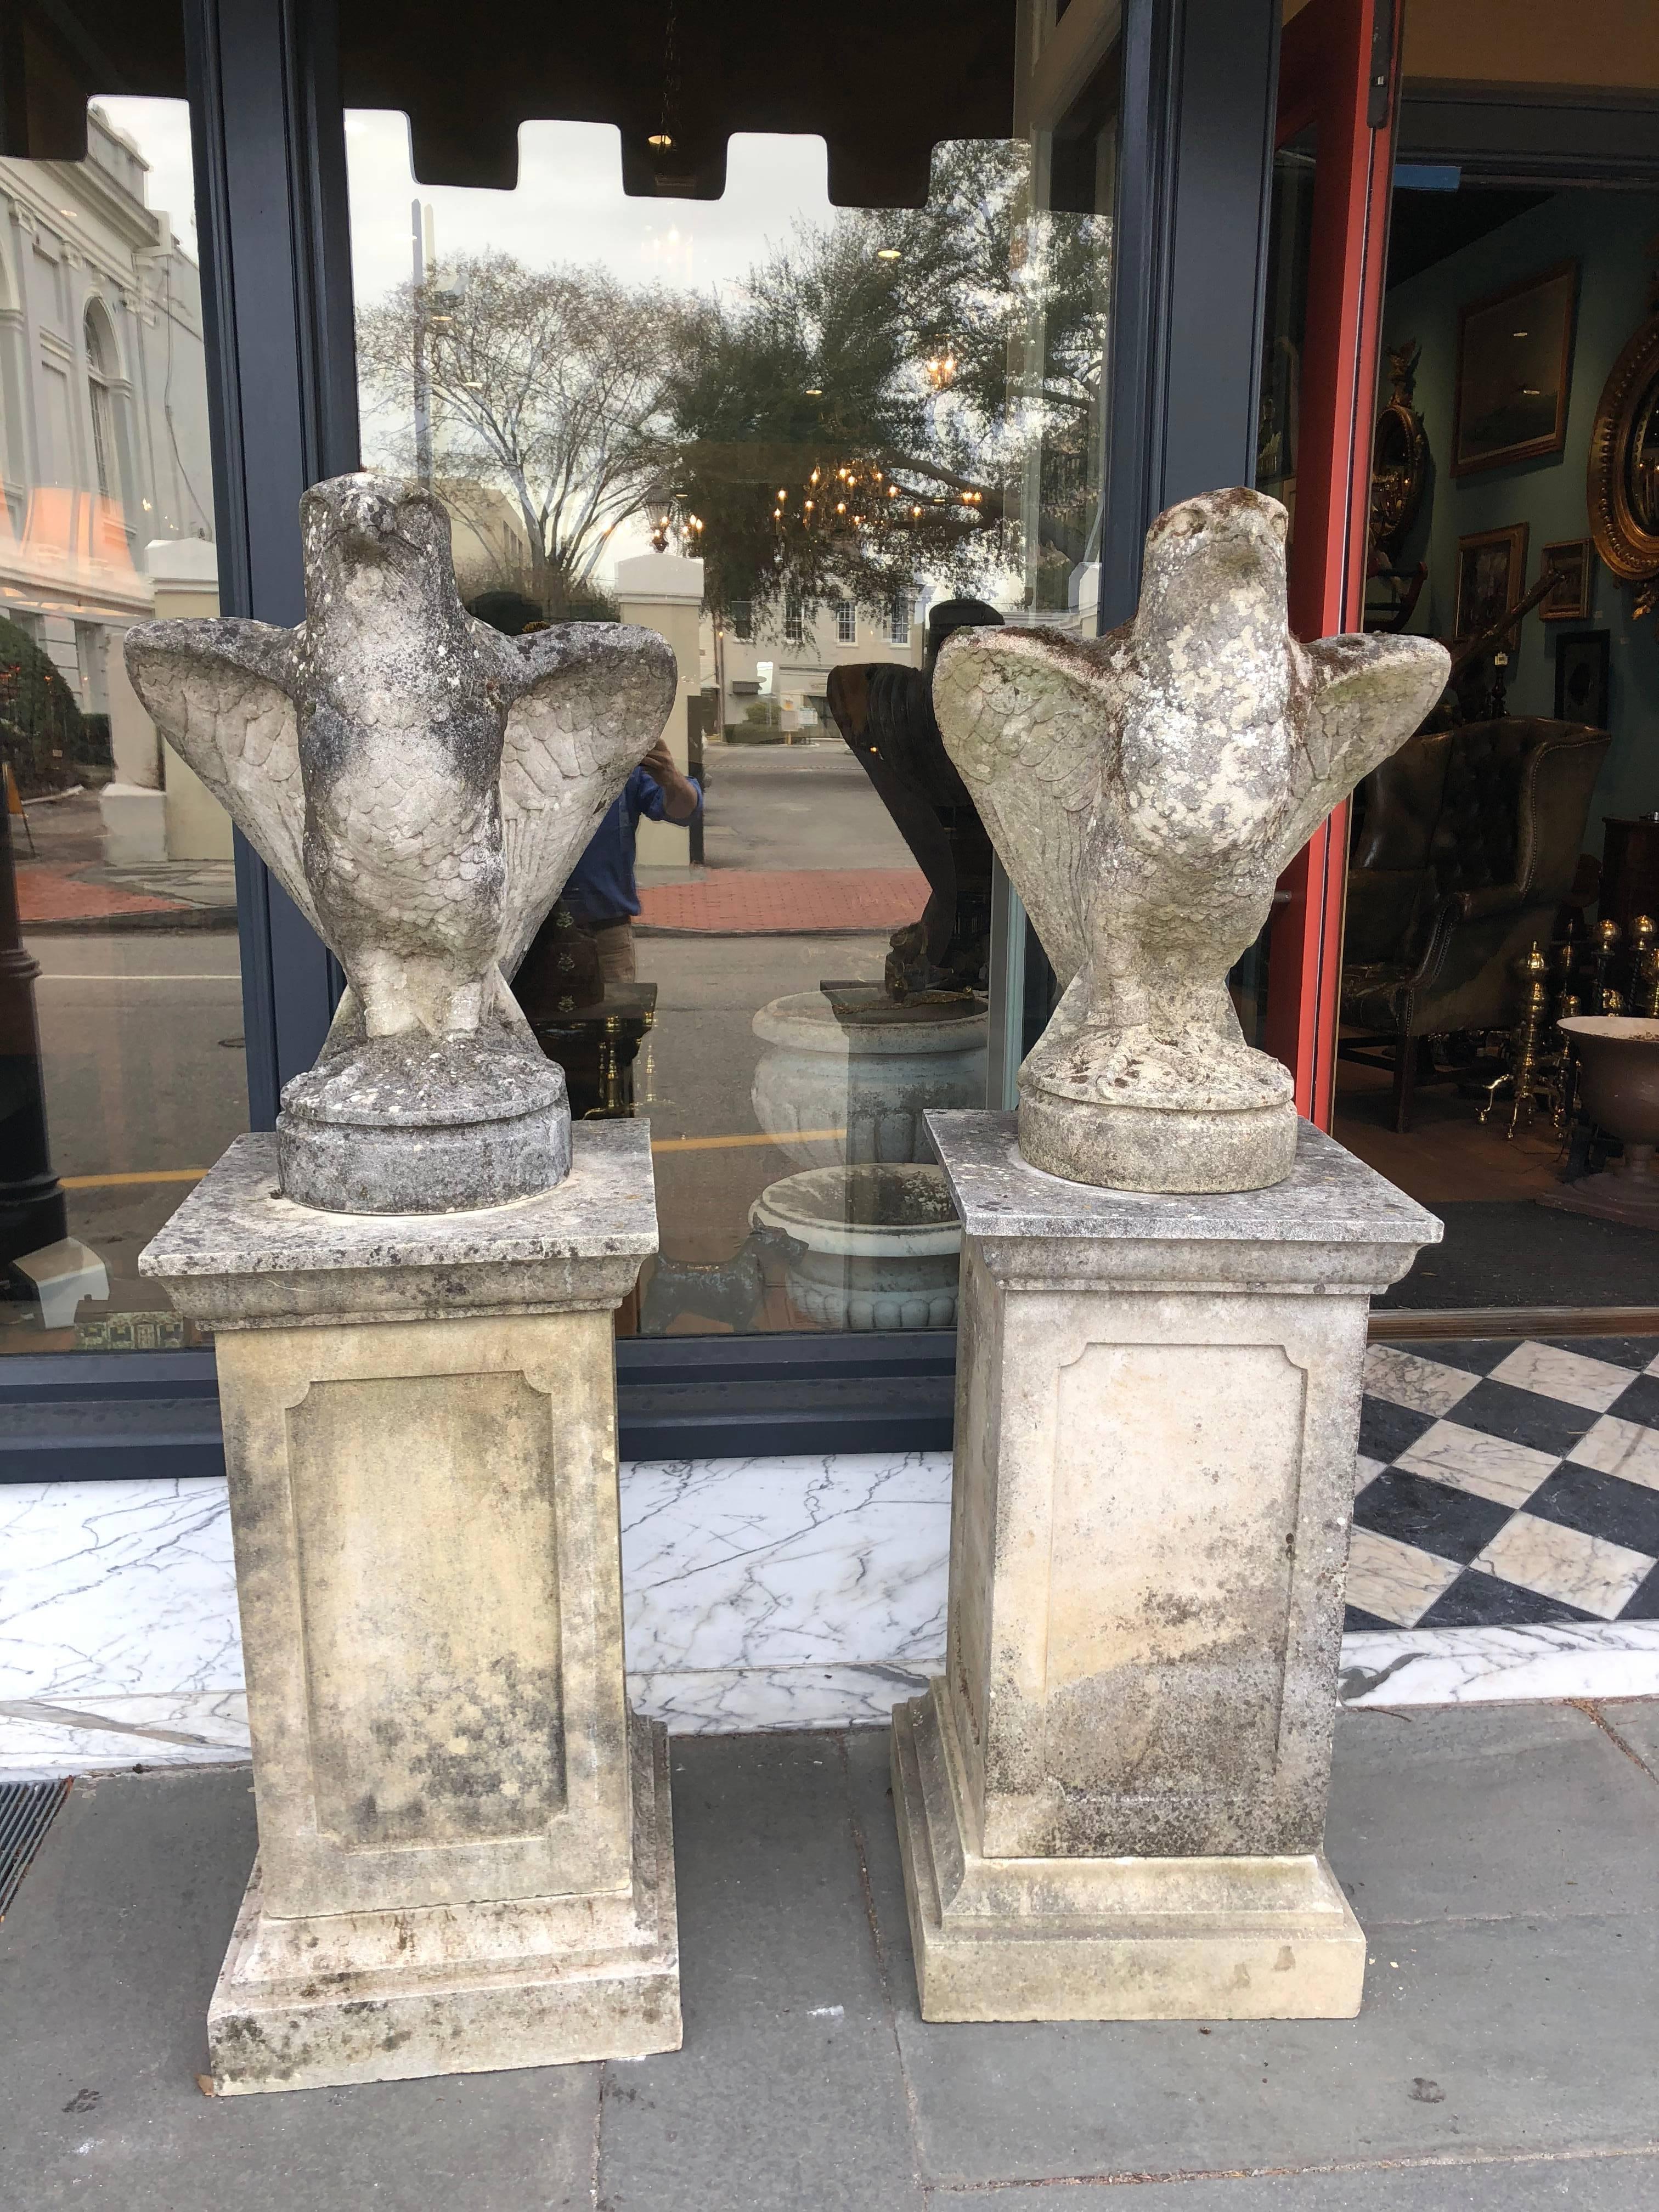 Pair of garden stone peregrine falcons on cast pedestals. Exquisite detail work with wonderful patination.